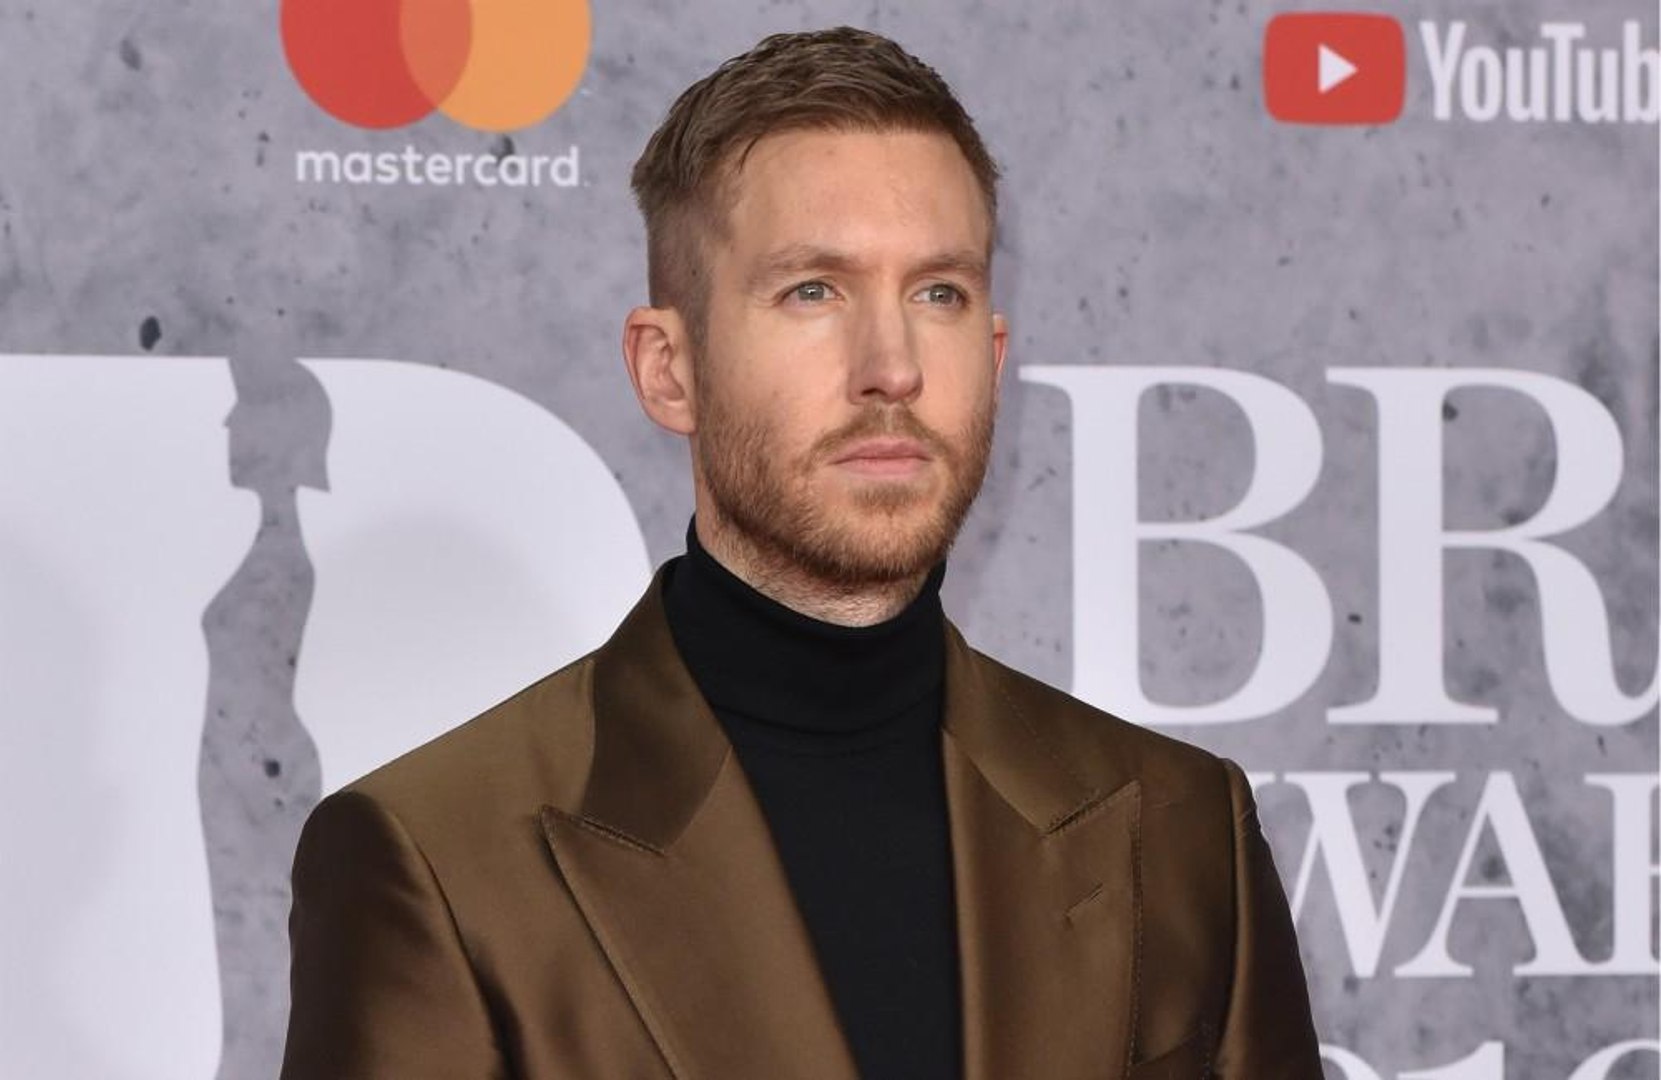 ⁣Calvin Harris and The Weeknd have confirmed collaboration